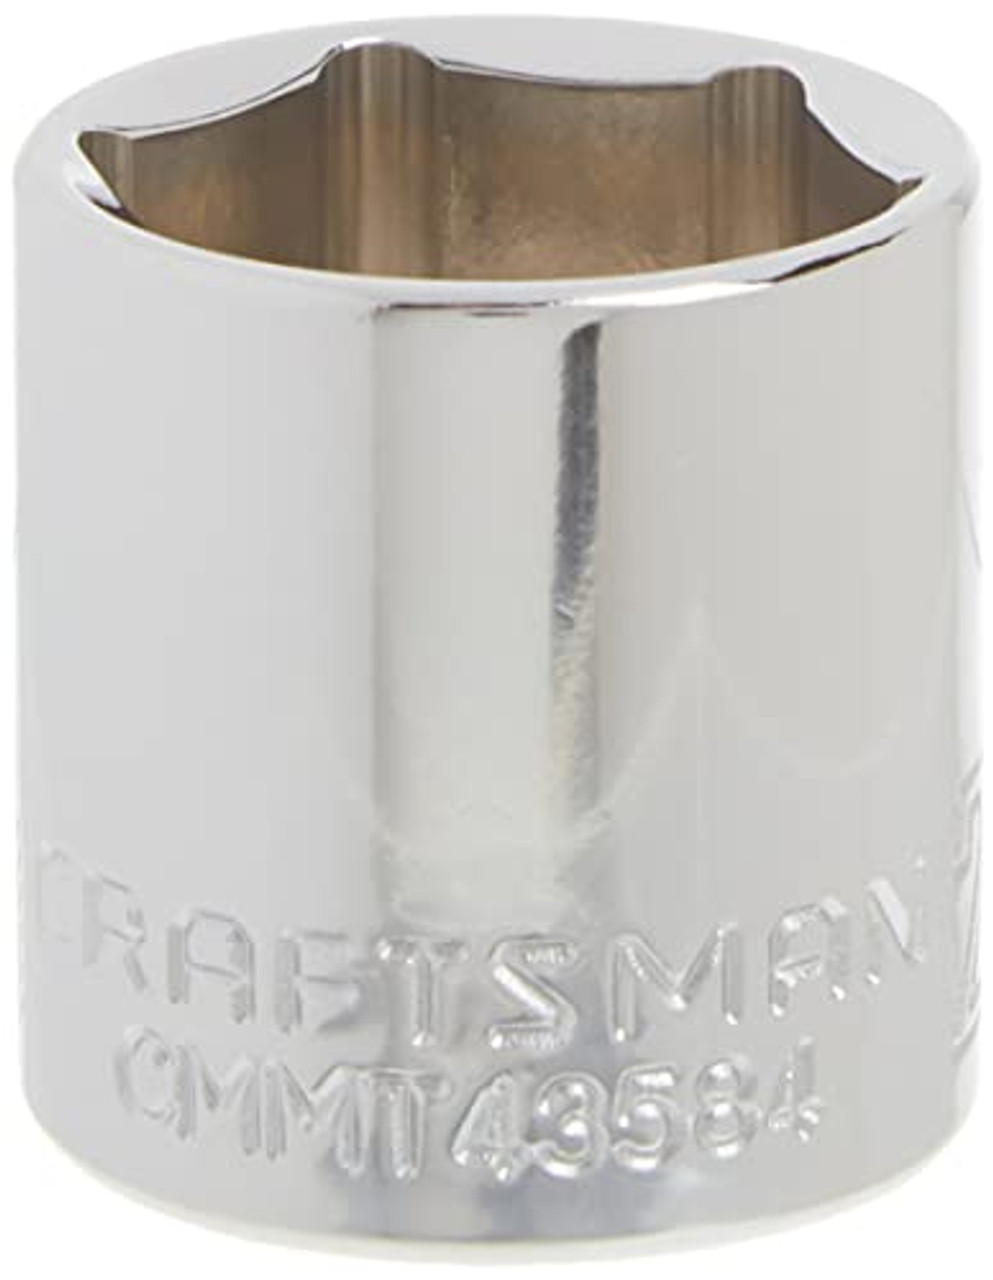 Craftsman CMMT43584 Shallow Socket, Metric, 3/8-Inch Drive, 21mm, 6-Point